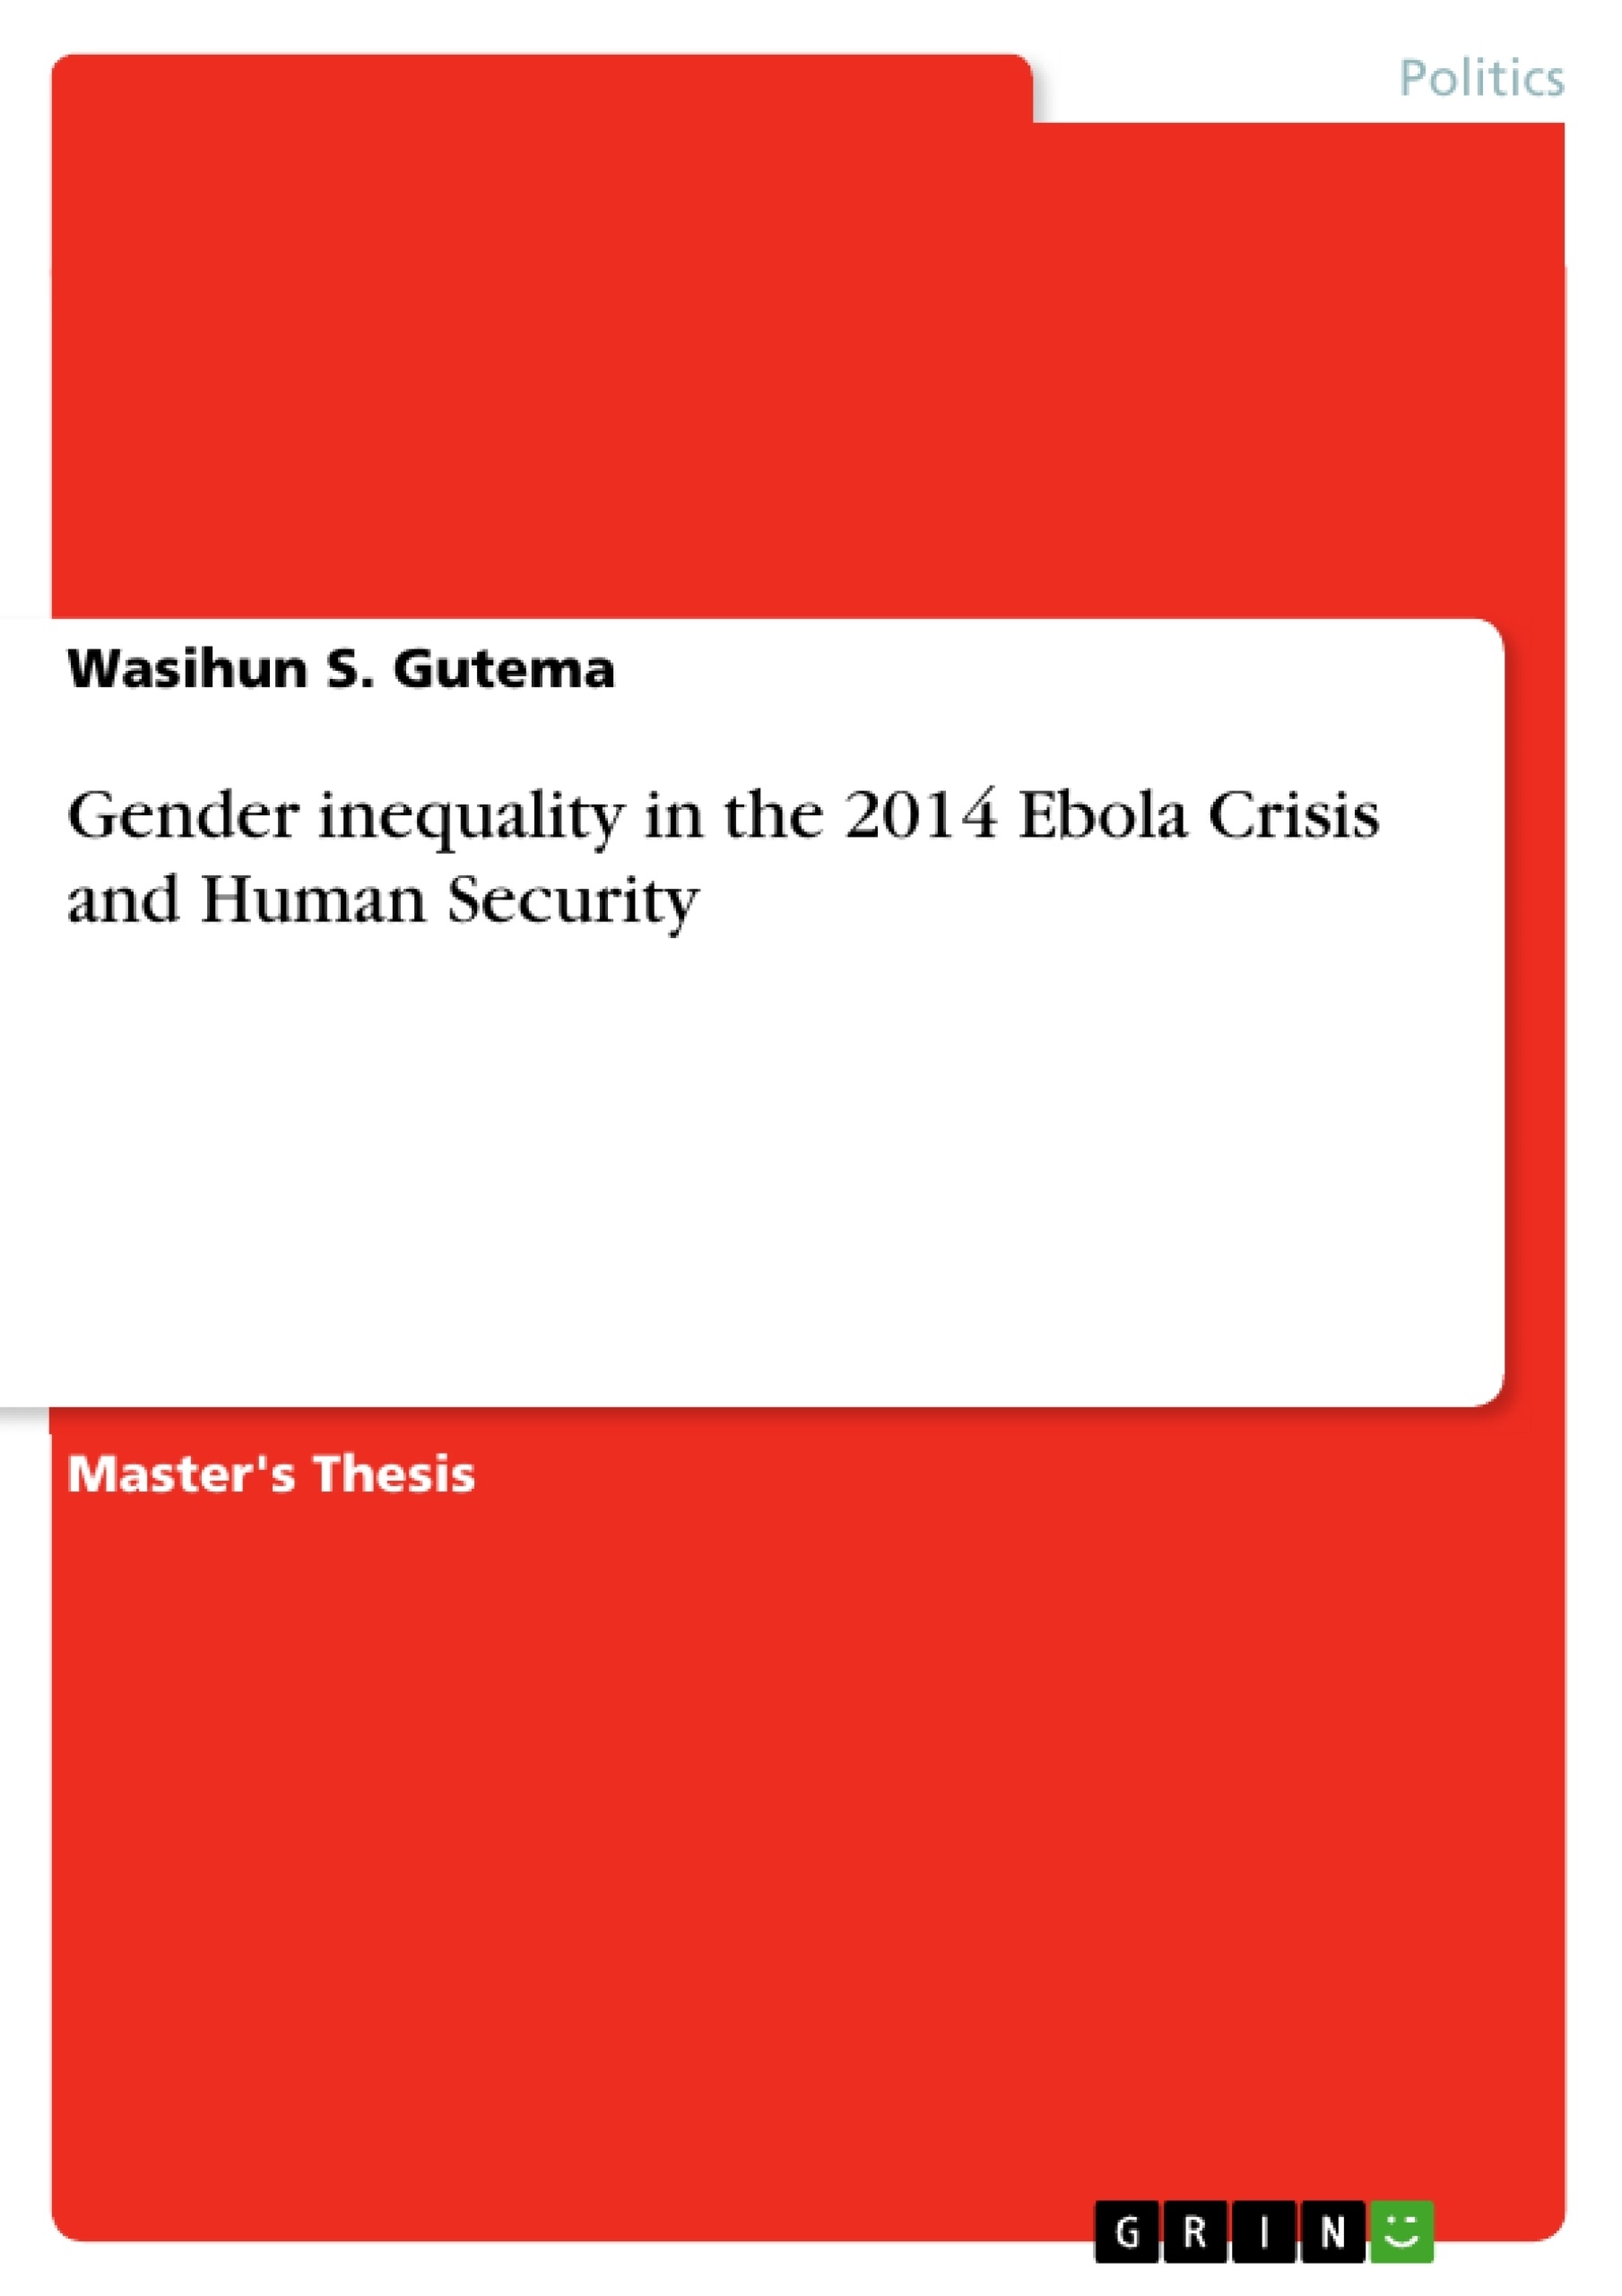 Titre: Gender inequality in the 2014 Ebola Crisis and Human Security